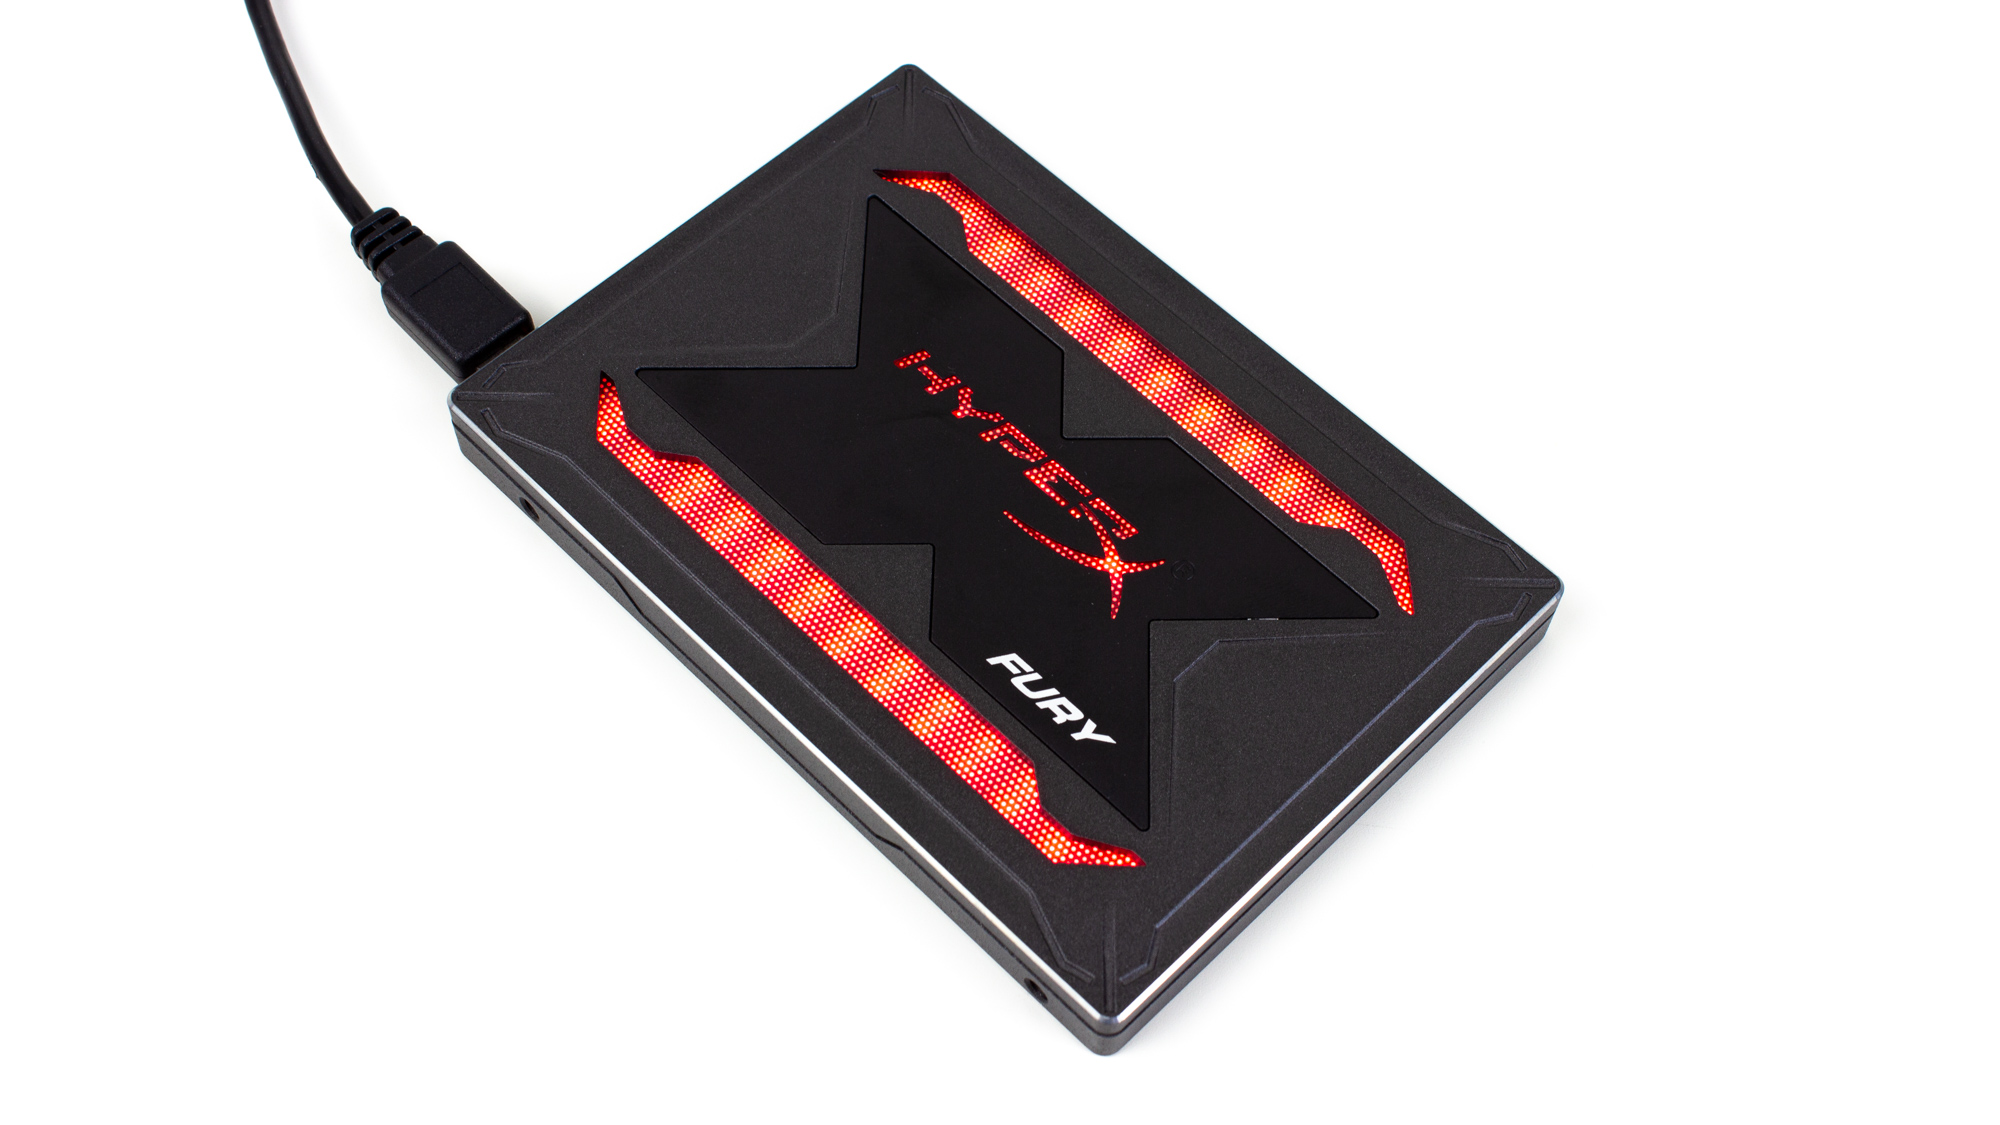 HyperX Fury RGB SSD Rote Beleuchtung